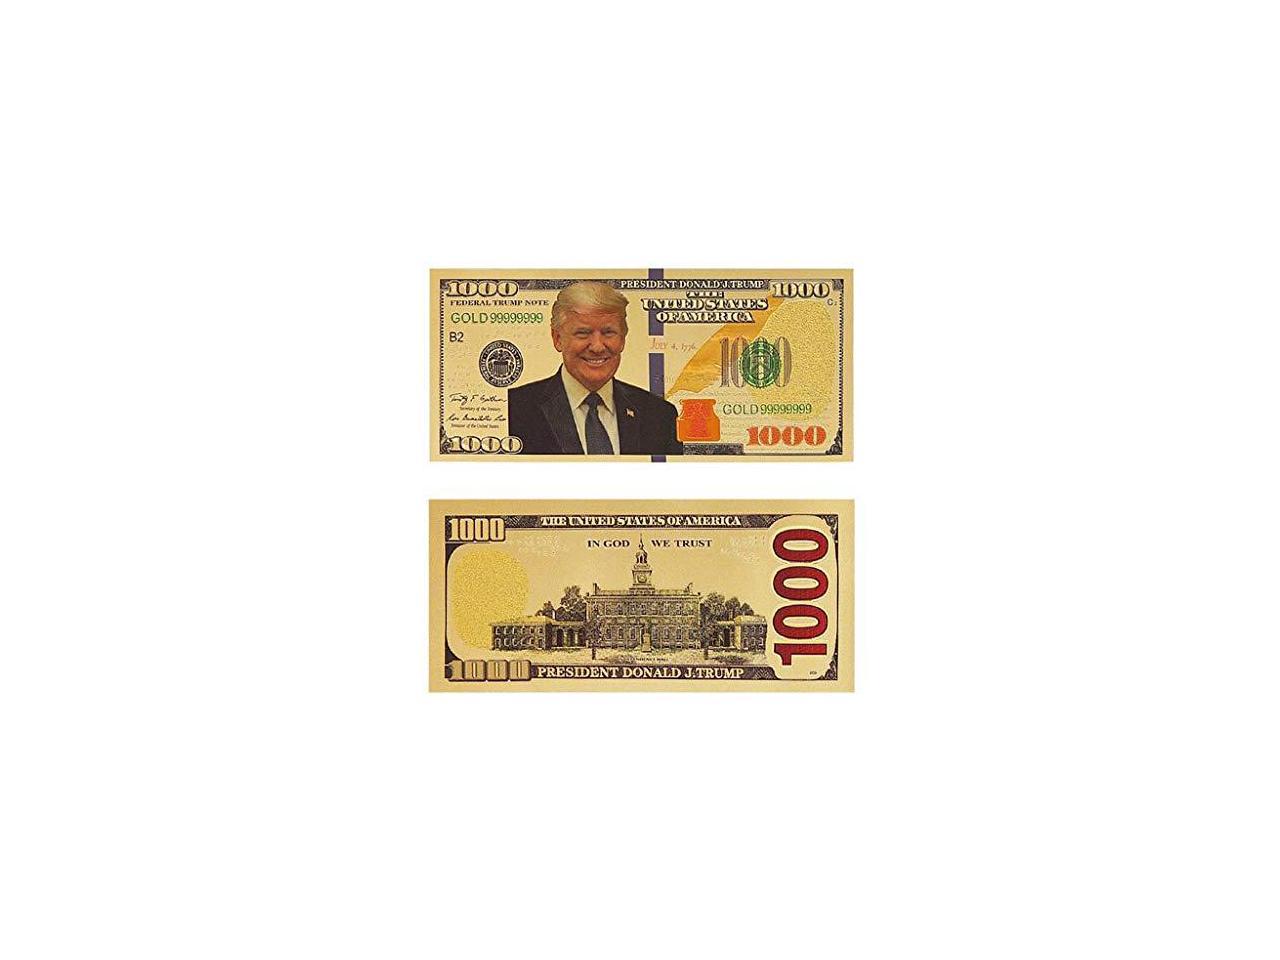 50 Pack One Thousand 24k Gold Coated Donald Trump Legacy Limited Edition Million Dollar Bill Great Gift for Coin Currency Collectors and Republican PartyYeah Donald Trump 1000 Dollar Bill Banknote 